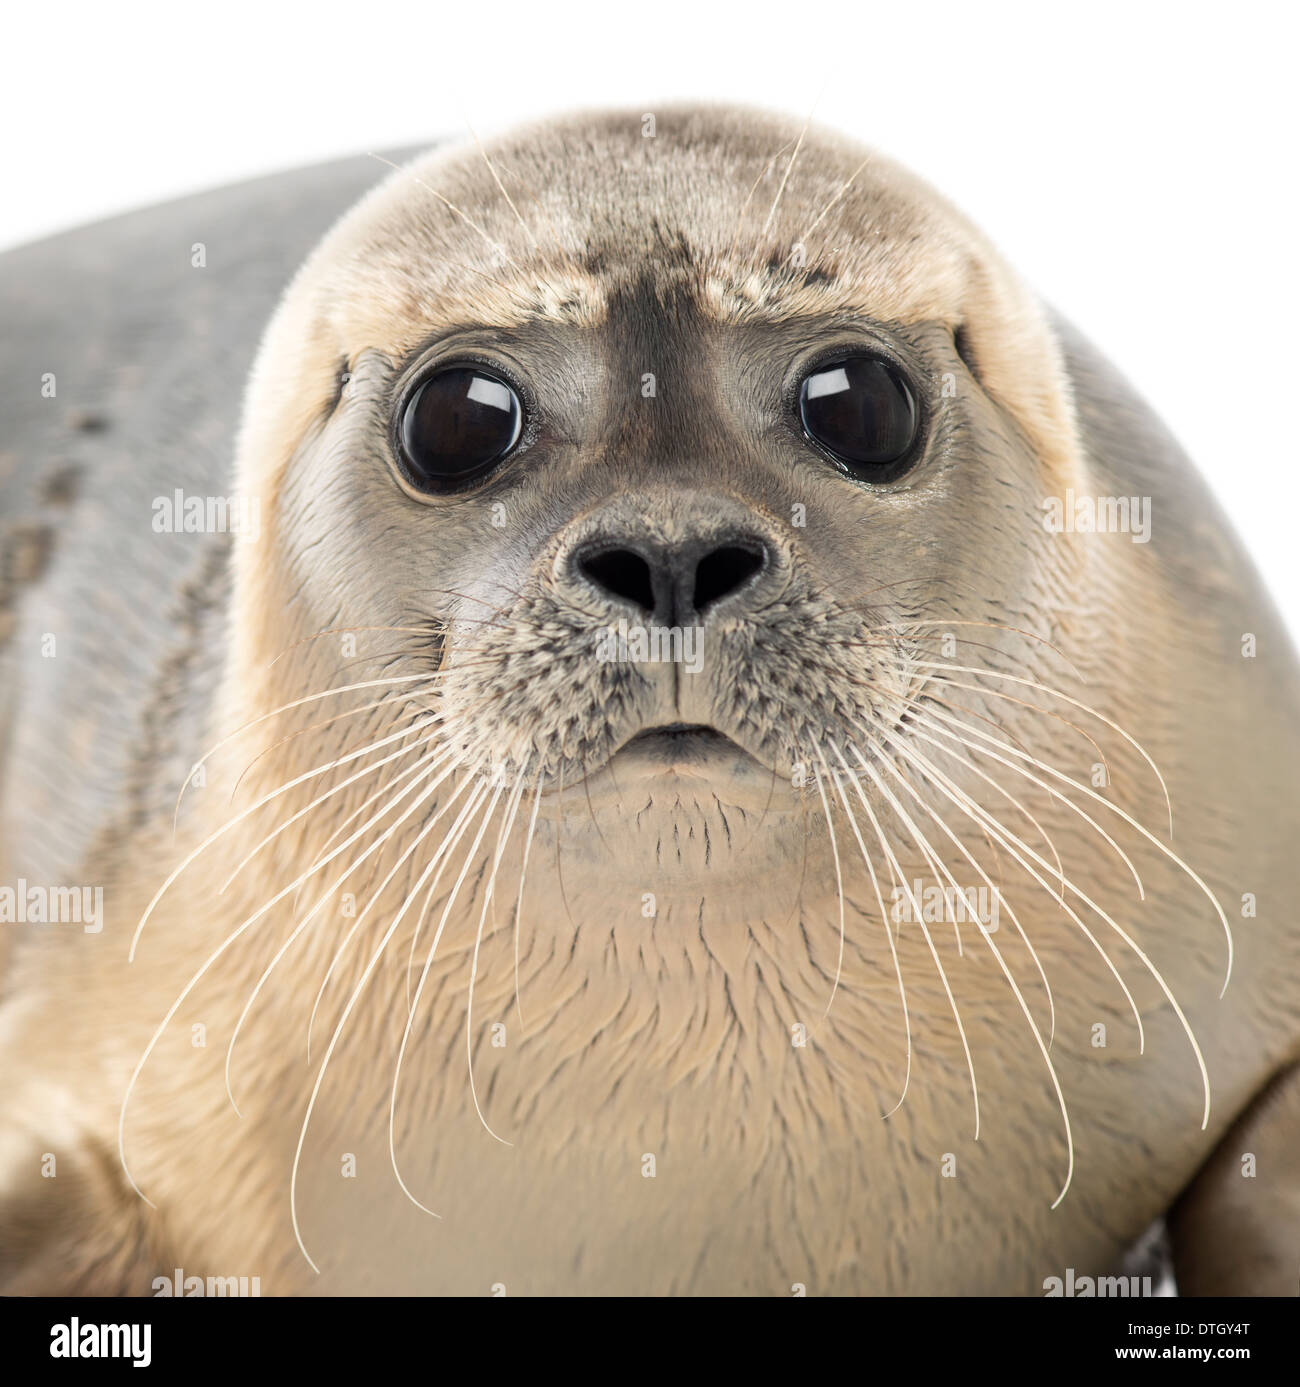 Close-up of a Common seal looking at the camera, Phoca vitulina, 8 months old,  against white background Stock Photo